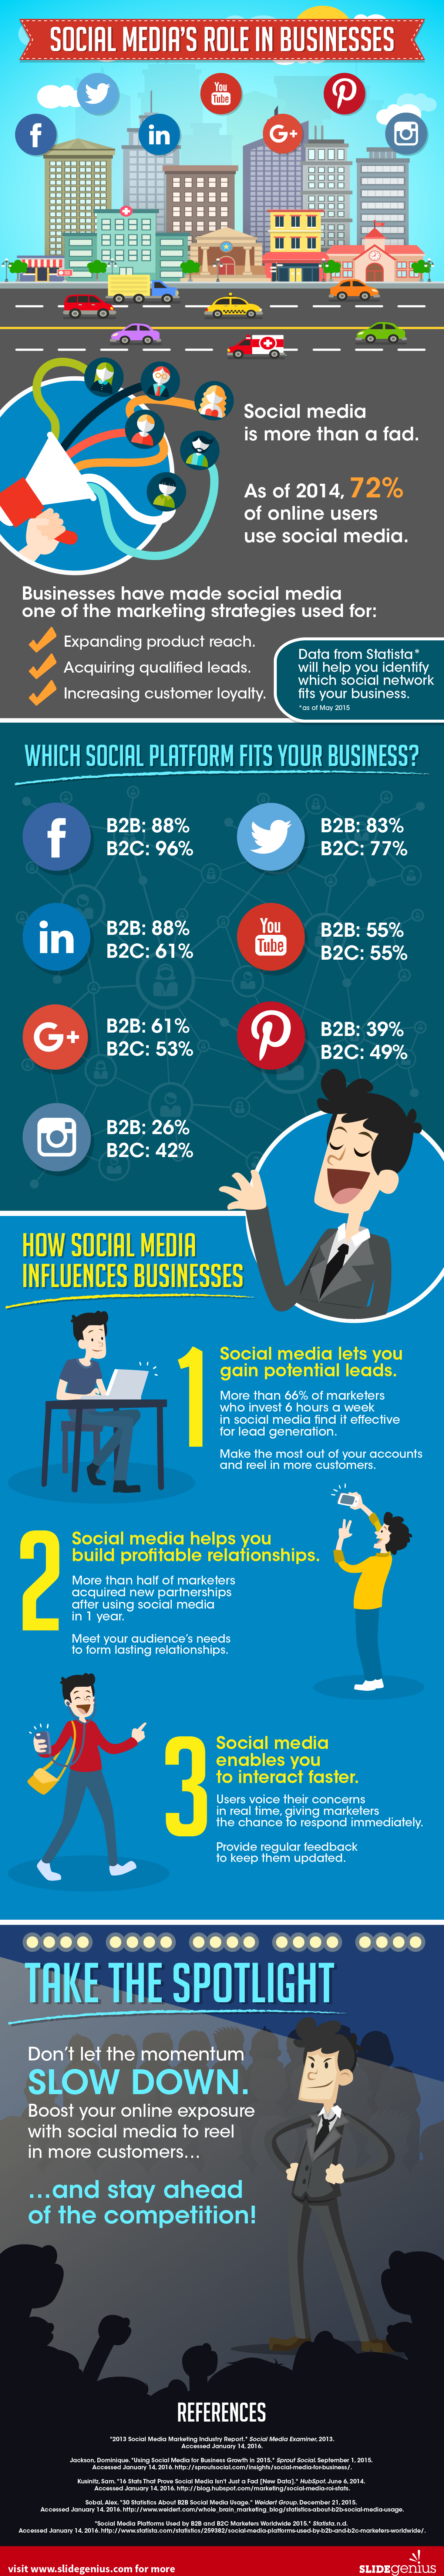 Social Media's Role in Businesses